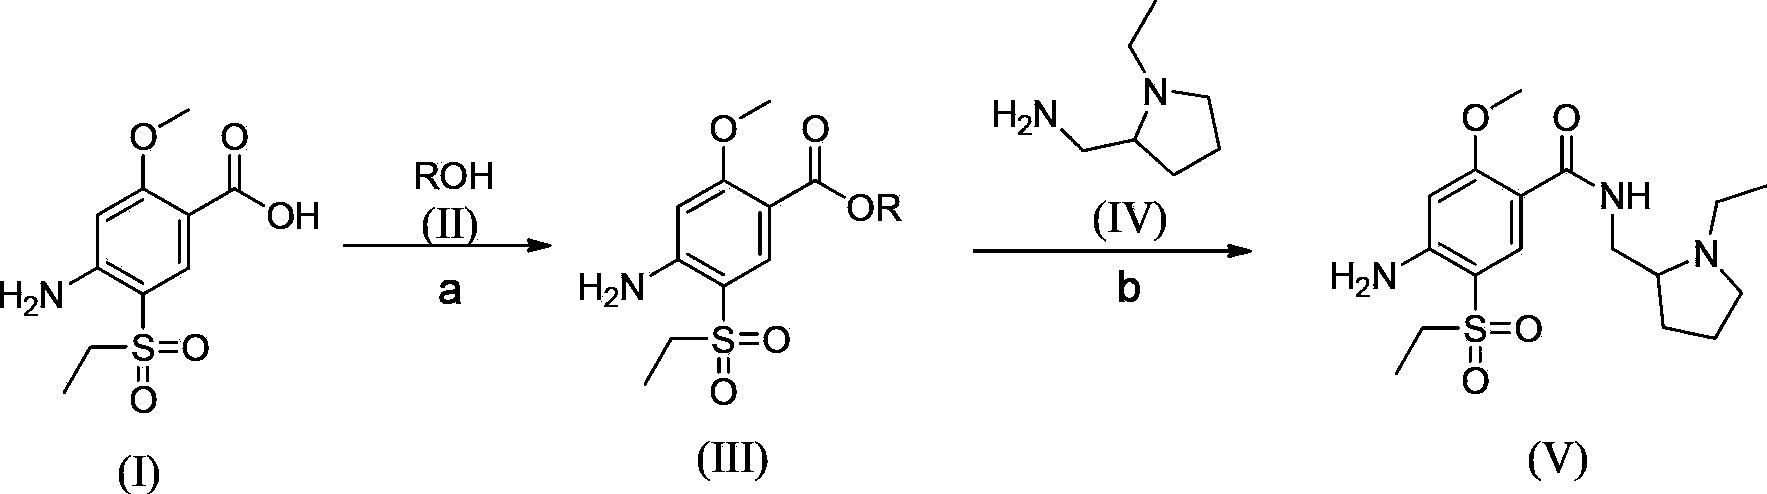 Synthesis method for amisulpride